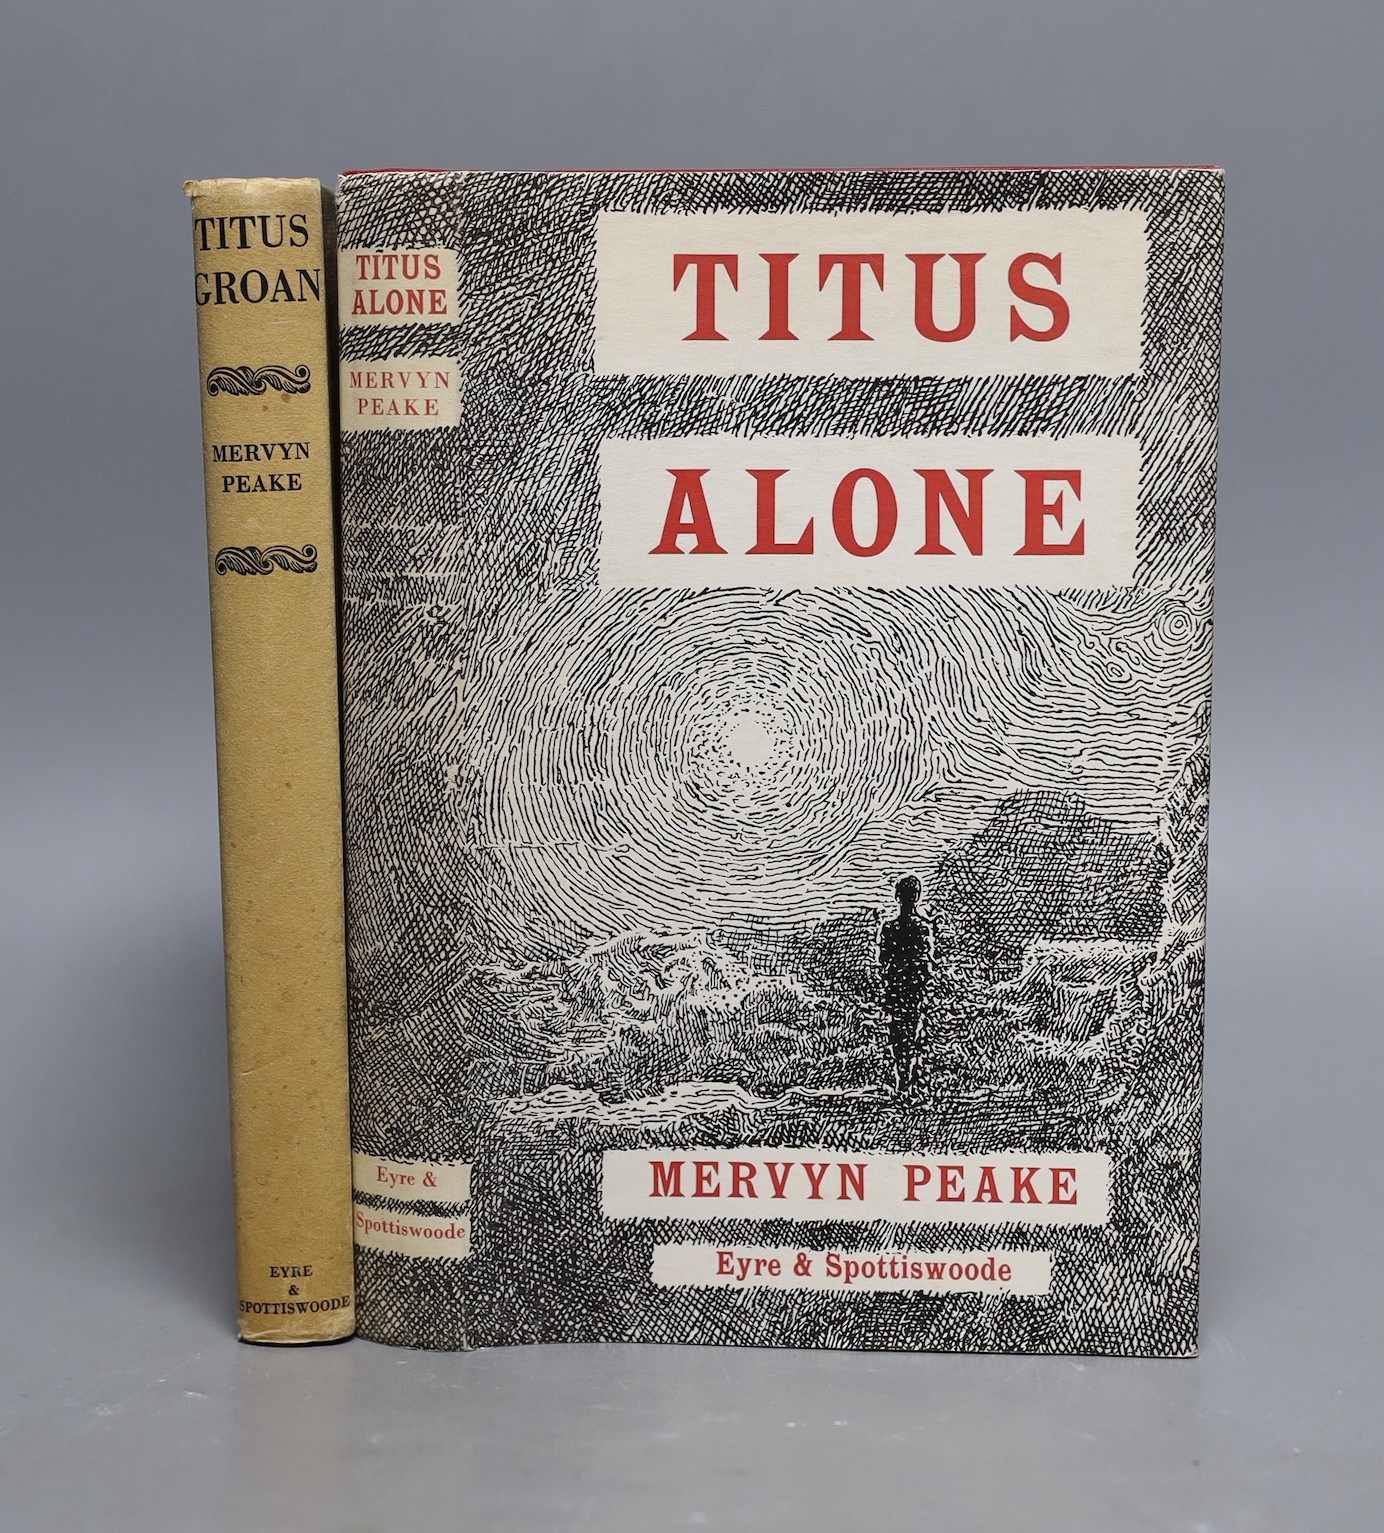 Peake, Mervyn - Titus Groan, 1st edition, original red cloth gilt, in 1st impression unclipped d/j (with no reviews), London, 1946 and Titus Alone, 1st edition, in unclipped d/j, London, 1959, (2)